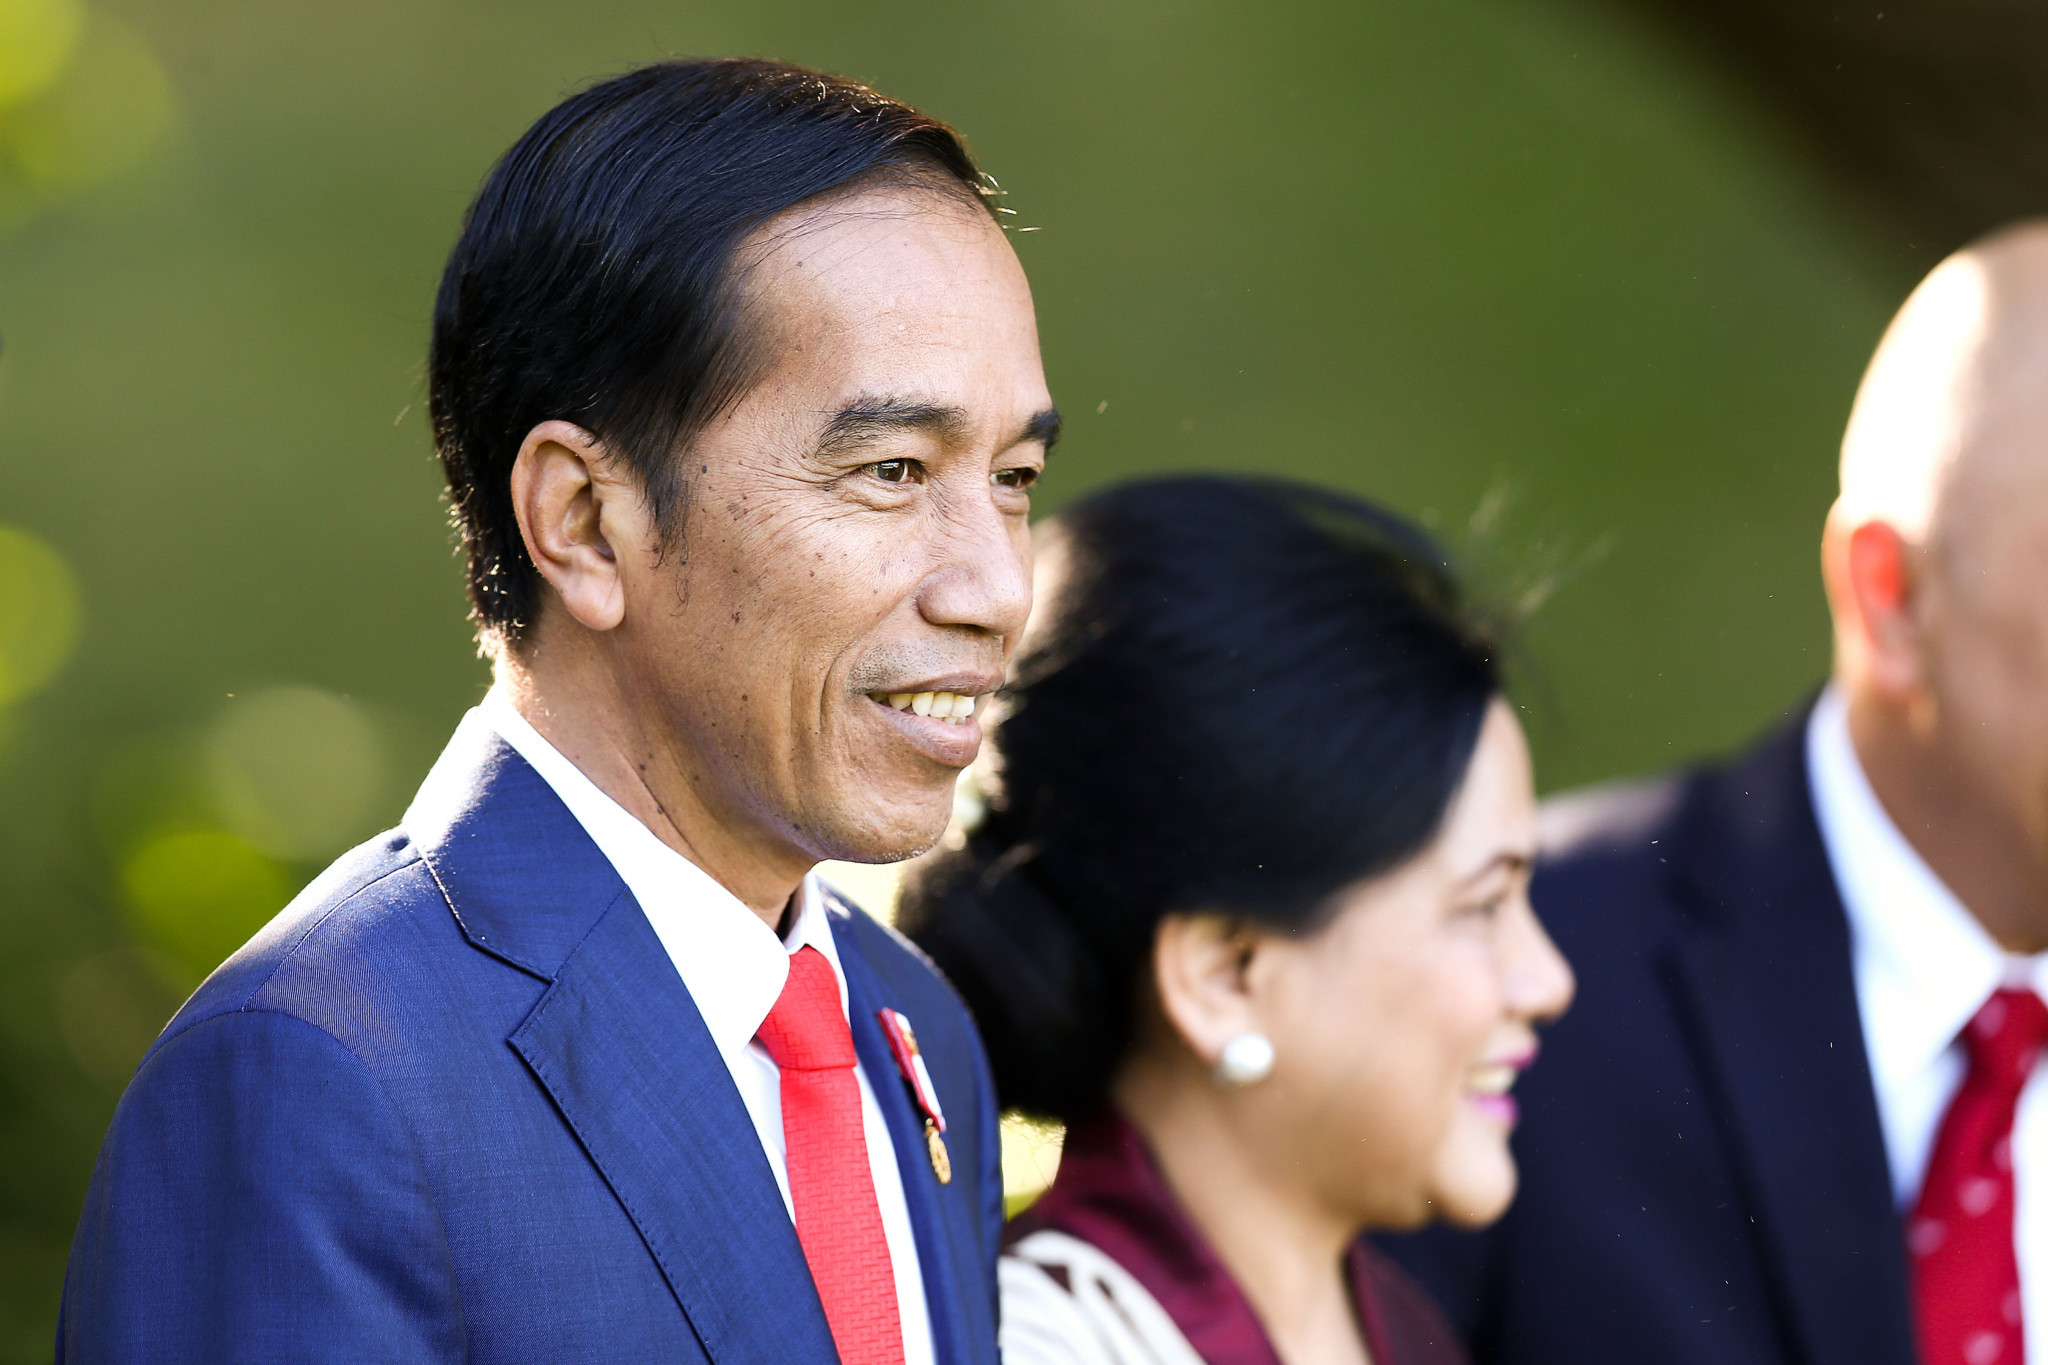 Indonesian President visits Jakabaring Sport City to check-up on preparations for 2018 Asian Games